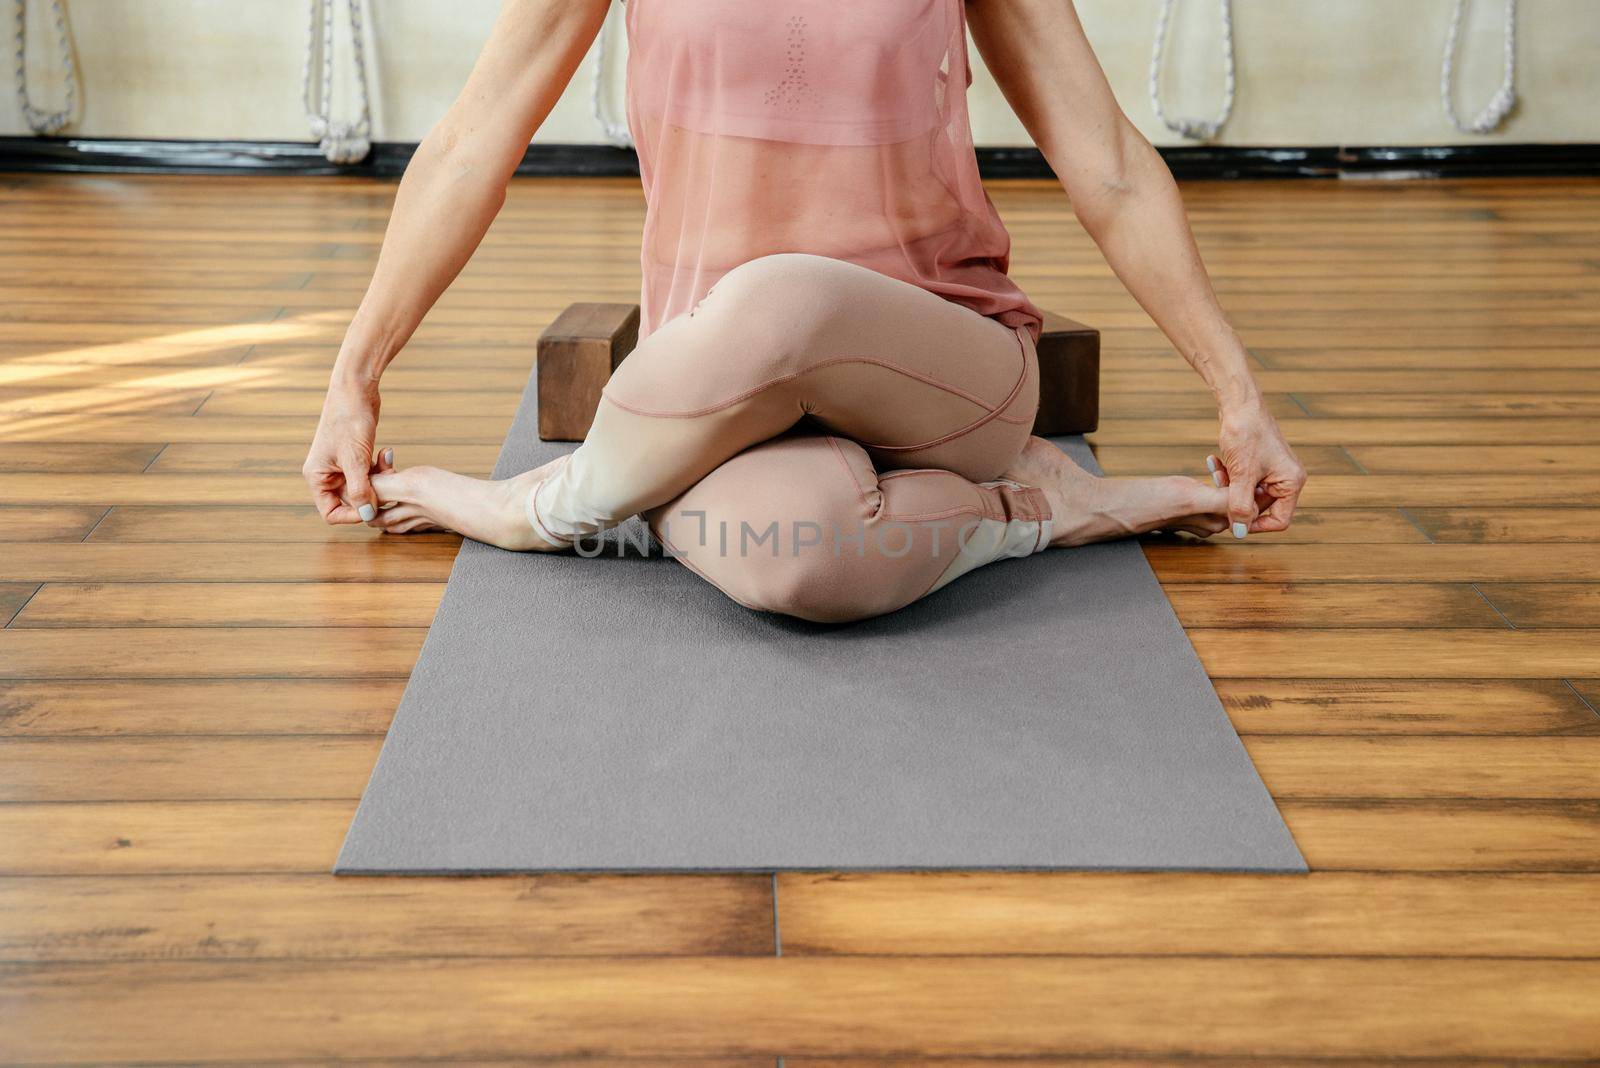 Mature strong woman doing yoga or pilates stretching relaxation exercise in white loft studio interior. Breathing, concentrating, healthy lifestyle concept by Mariakray